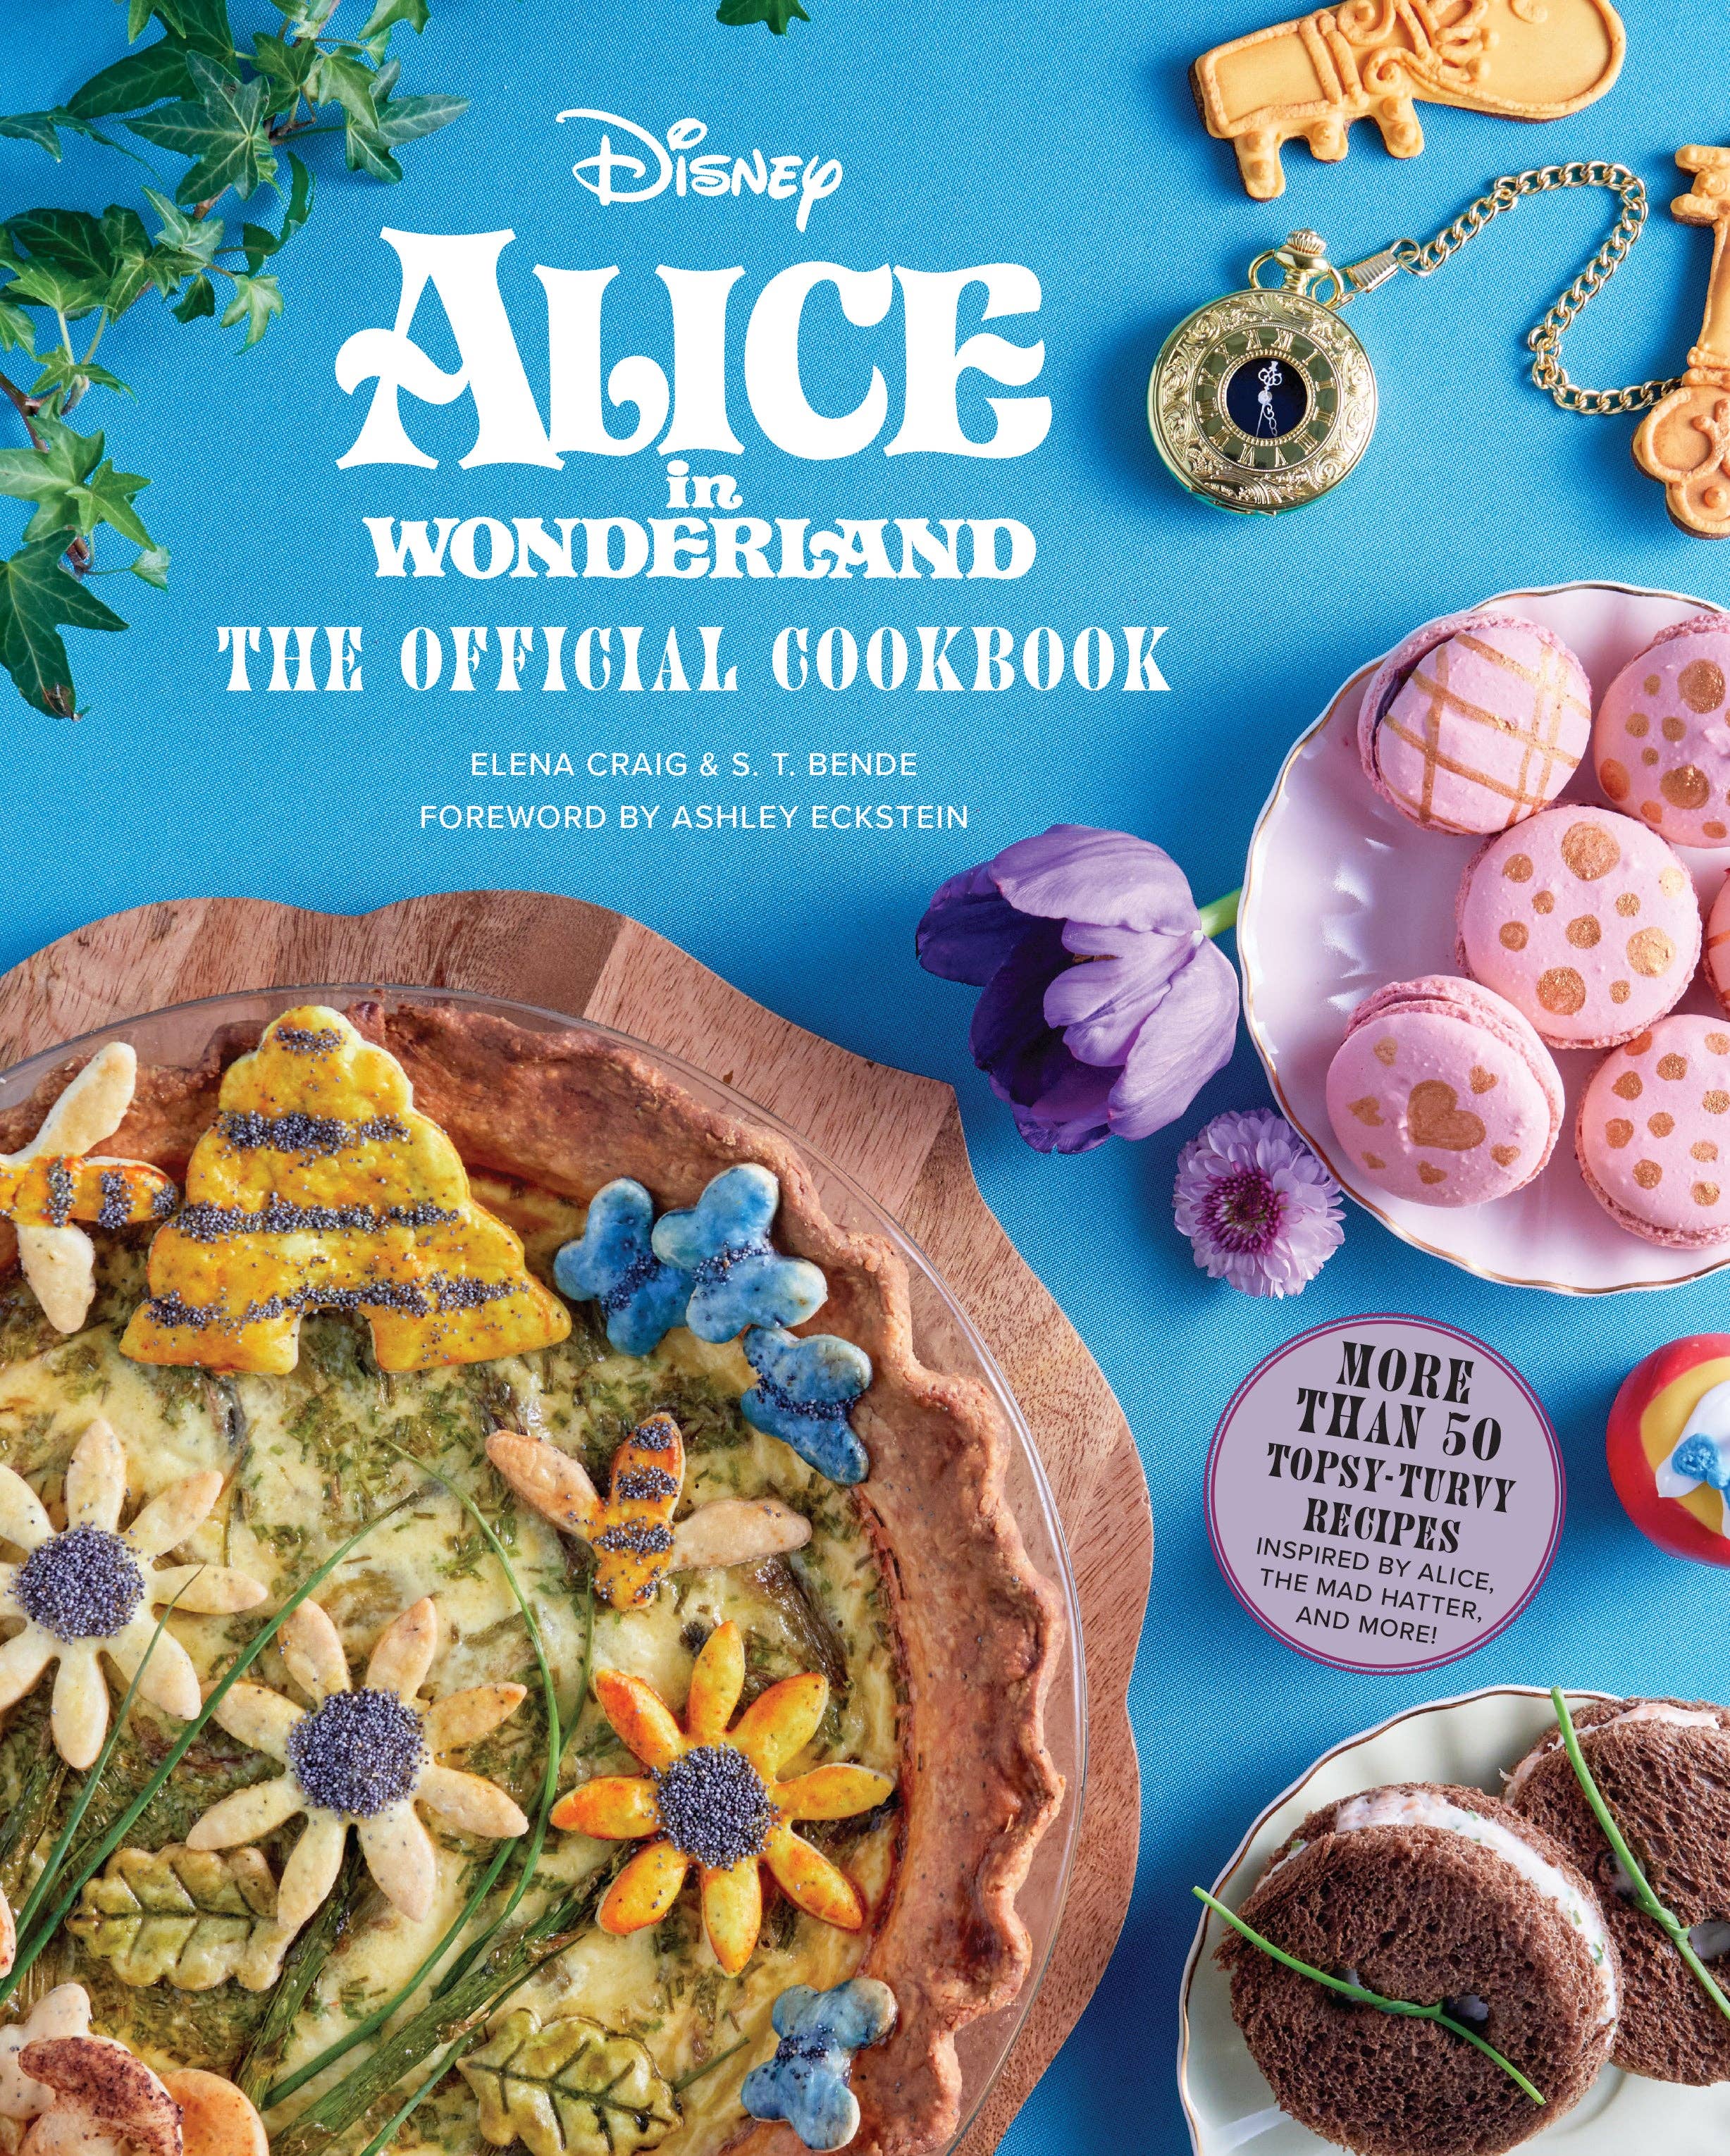 The　Cookbook　Official　My　Disney　Alice　Shopper　in　Wonderland:　–　Magical